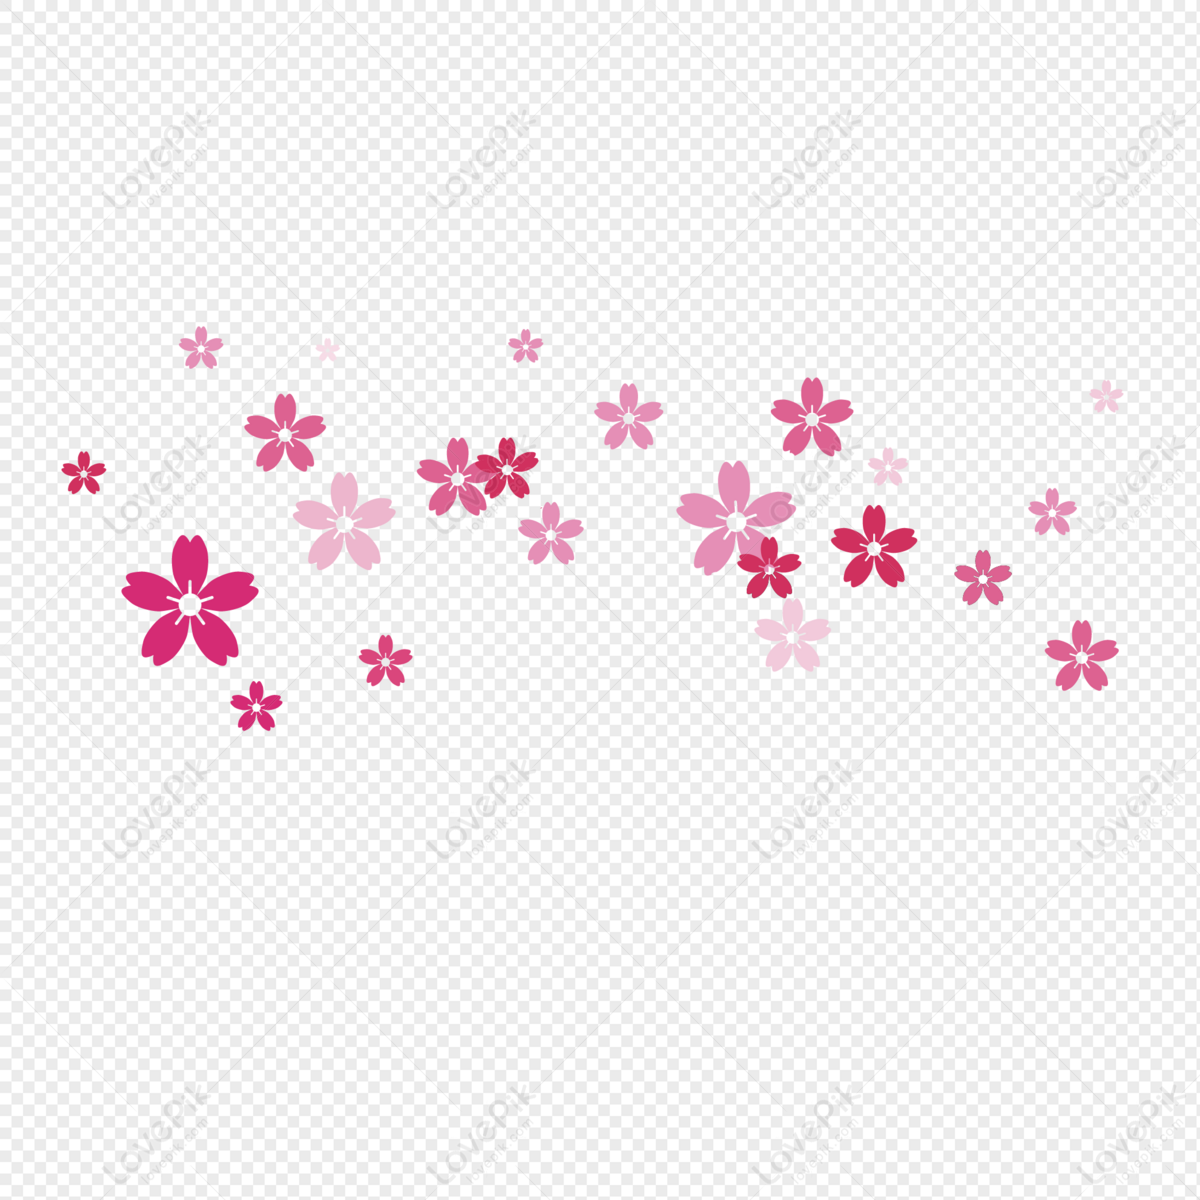 Vector Floating Flowers PNG Image Free Download And Clipart Image For Free  Download - Lovepik | 401272591